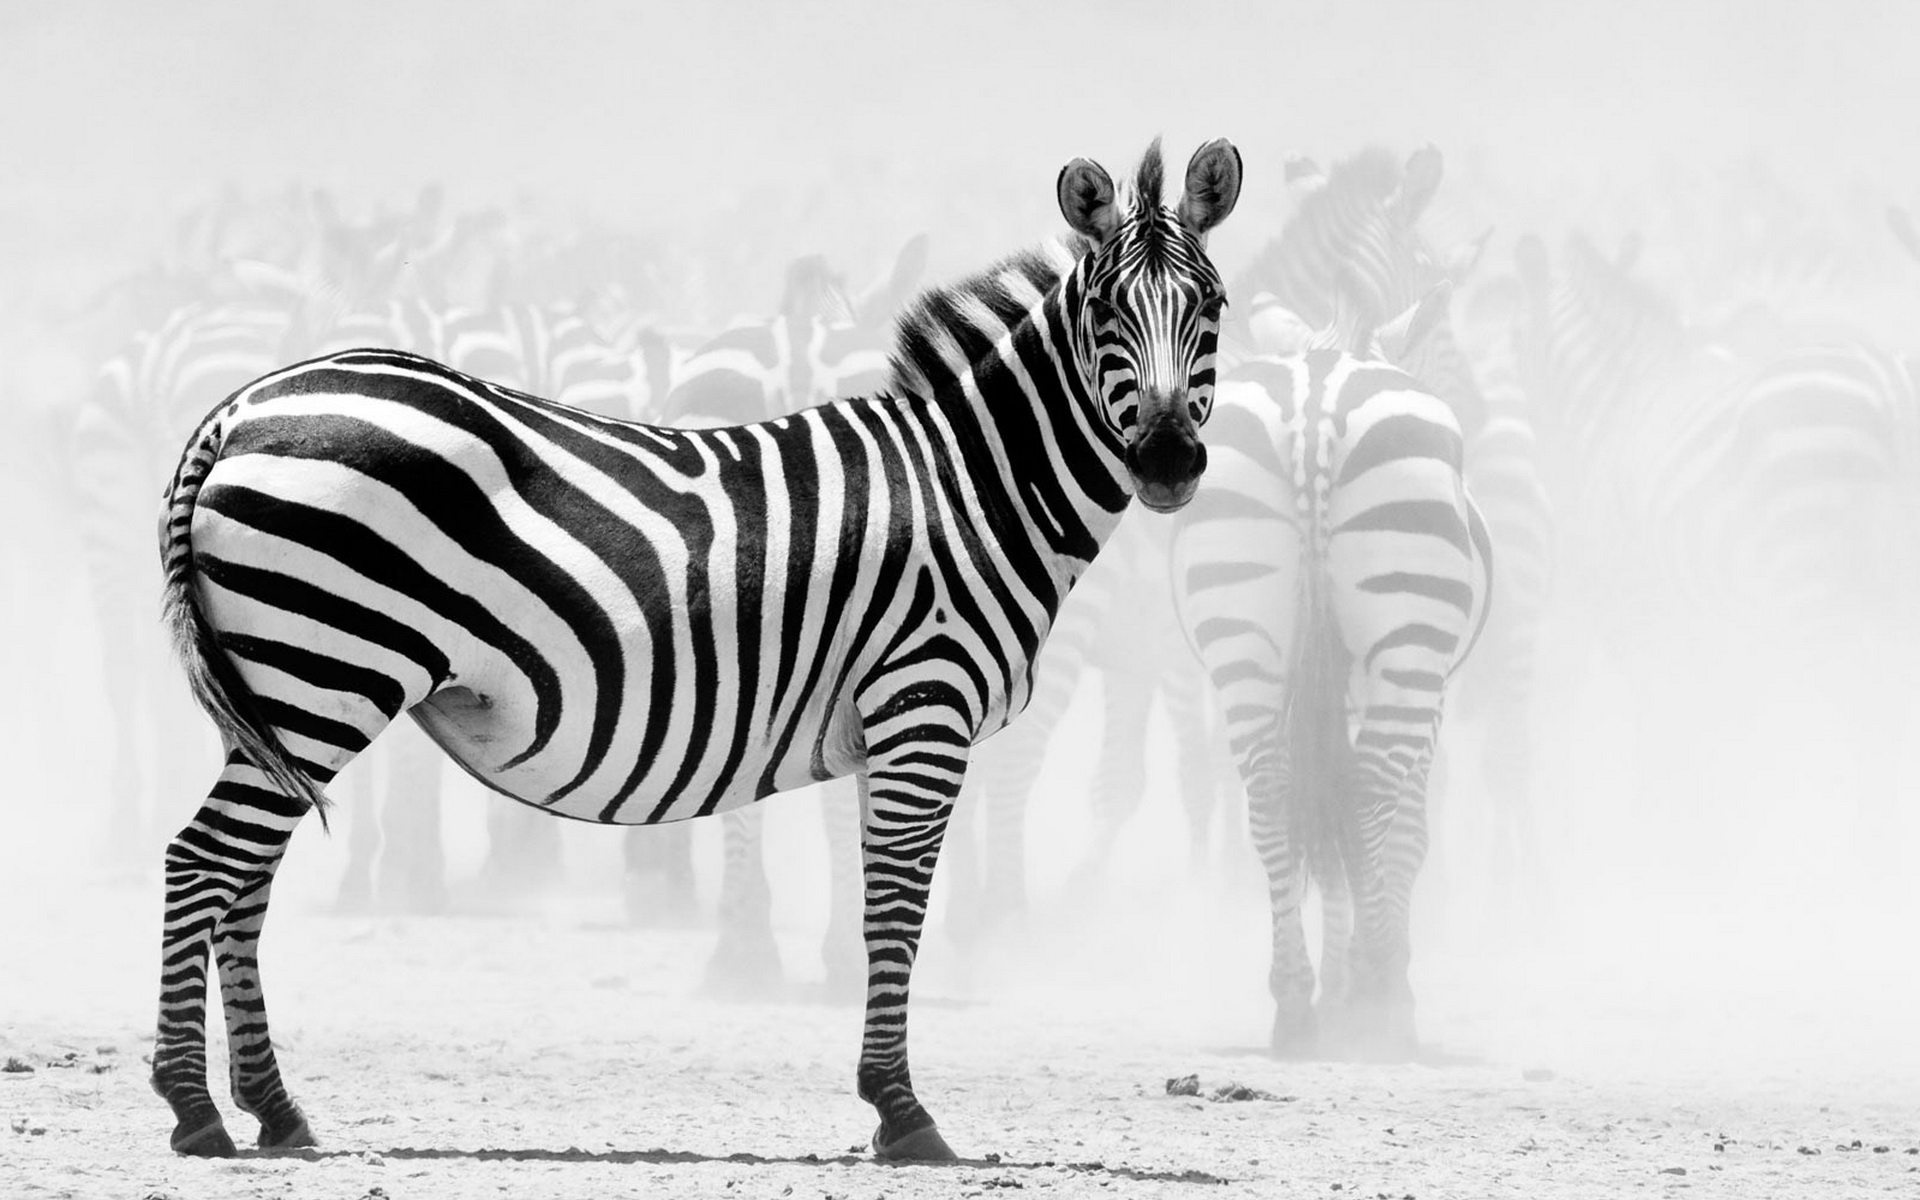 Herd of zebra wallpapers and images - wallpapers, pictures, photos